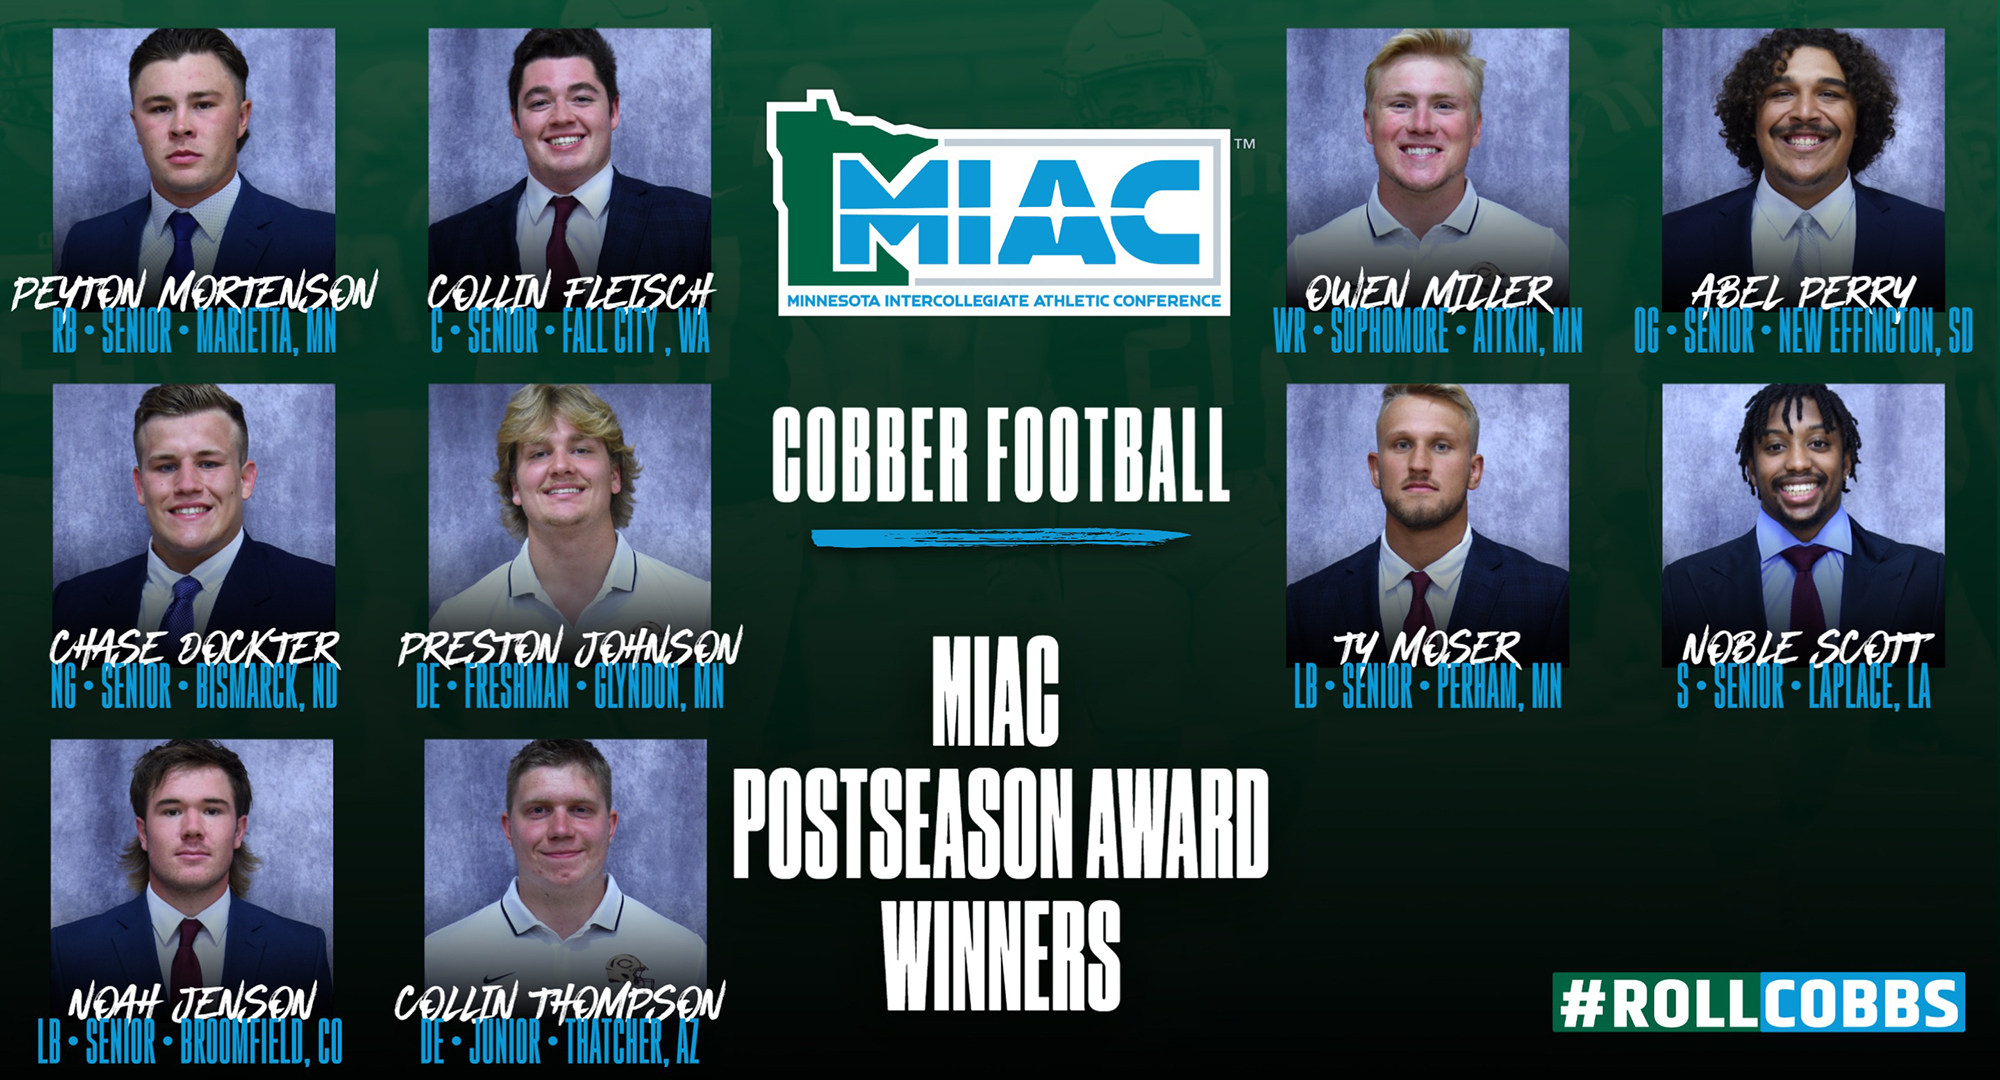 Concordia had 10 players earn MIAC postseason honors as voted on by the league coaches. That total is the most since the 2017 season.